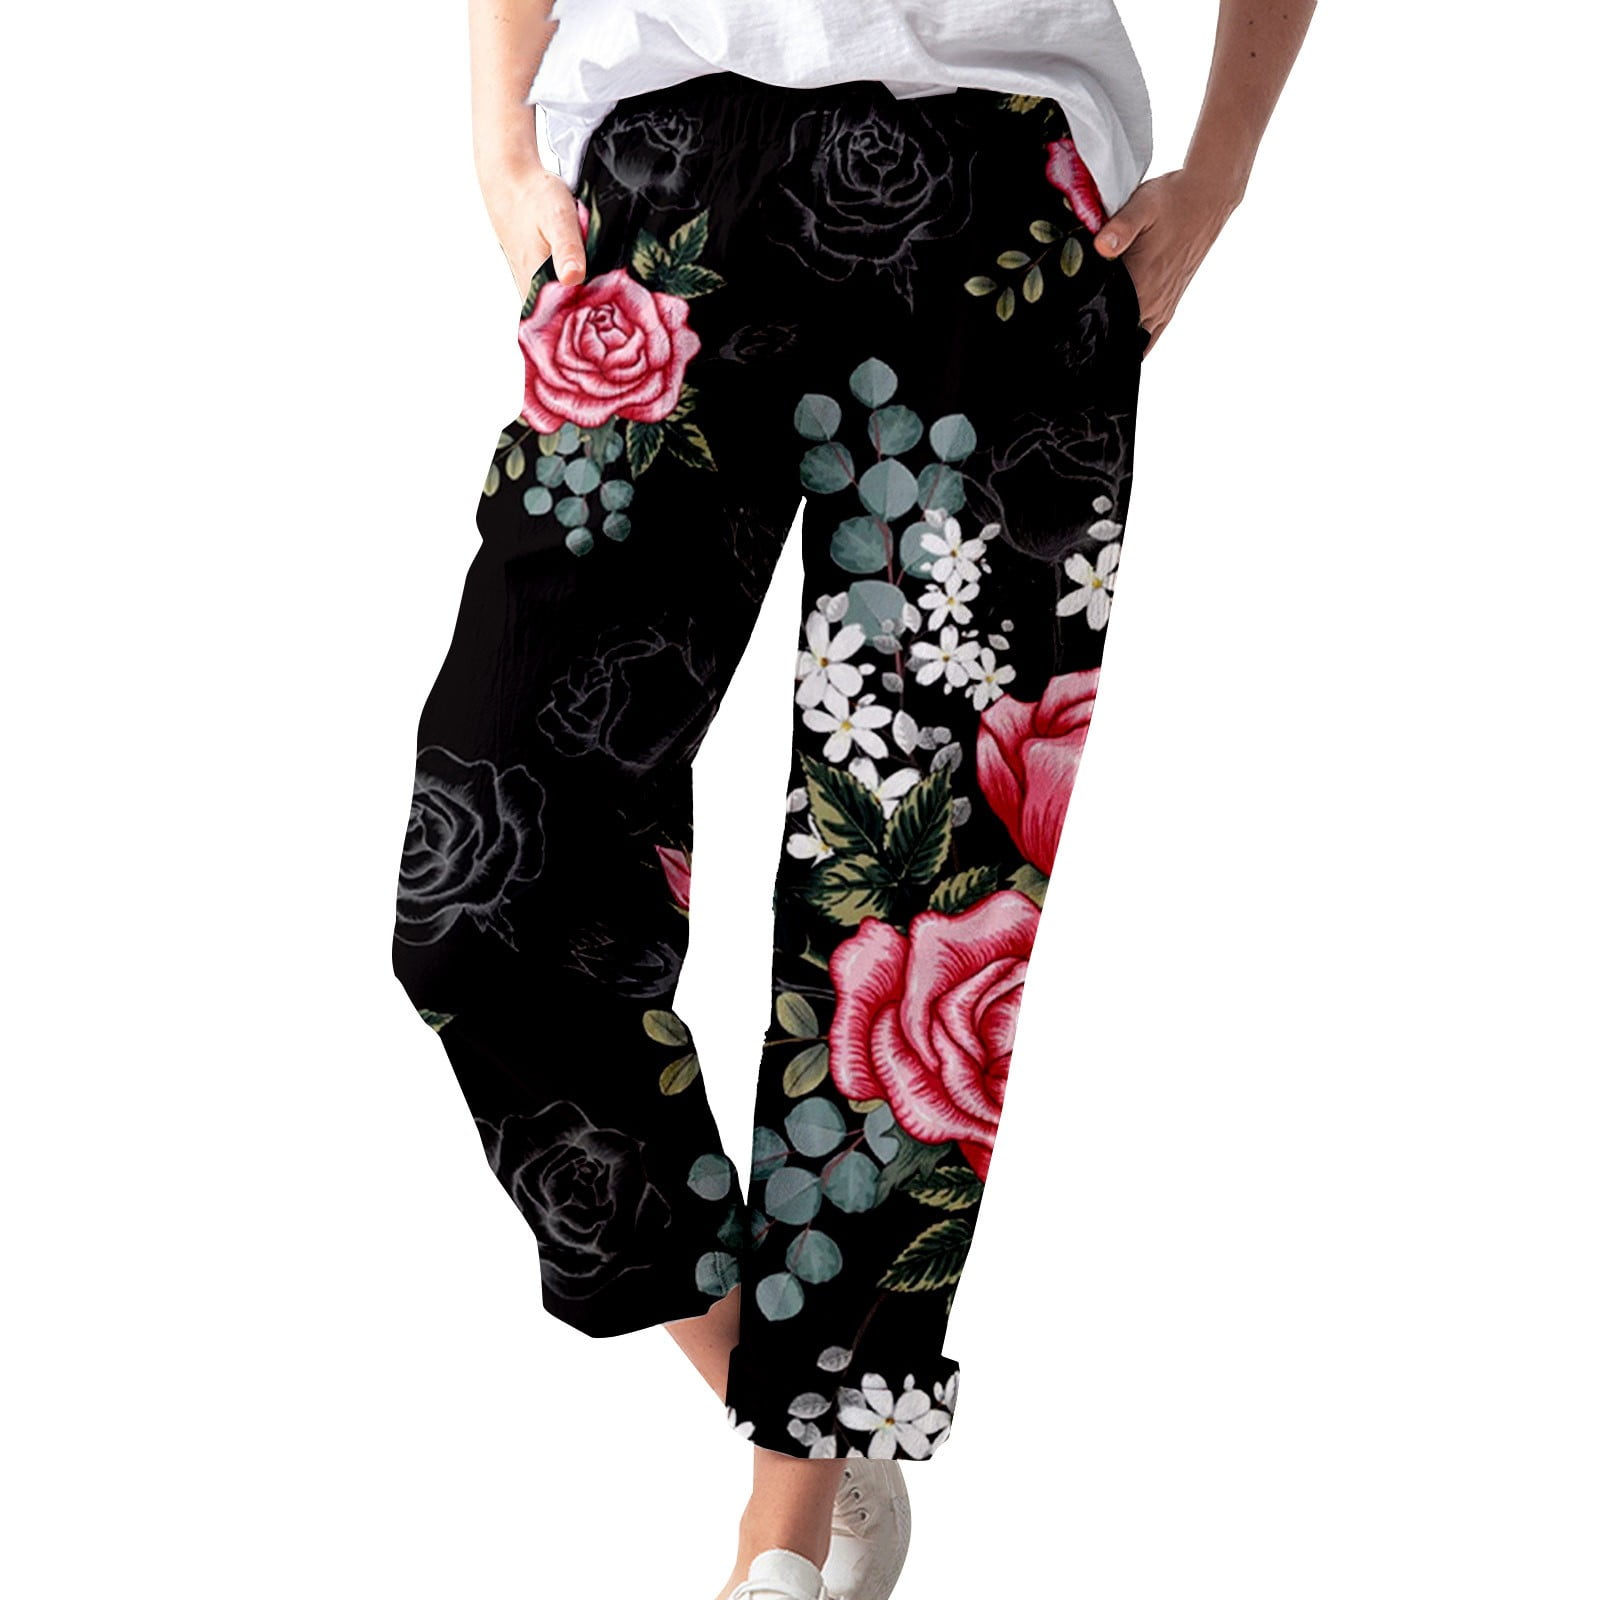 PMUYBHF Baggy Sweatpants for Women Tall Women's Printed Cotton and